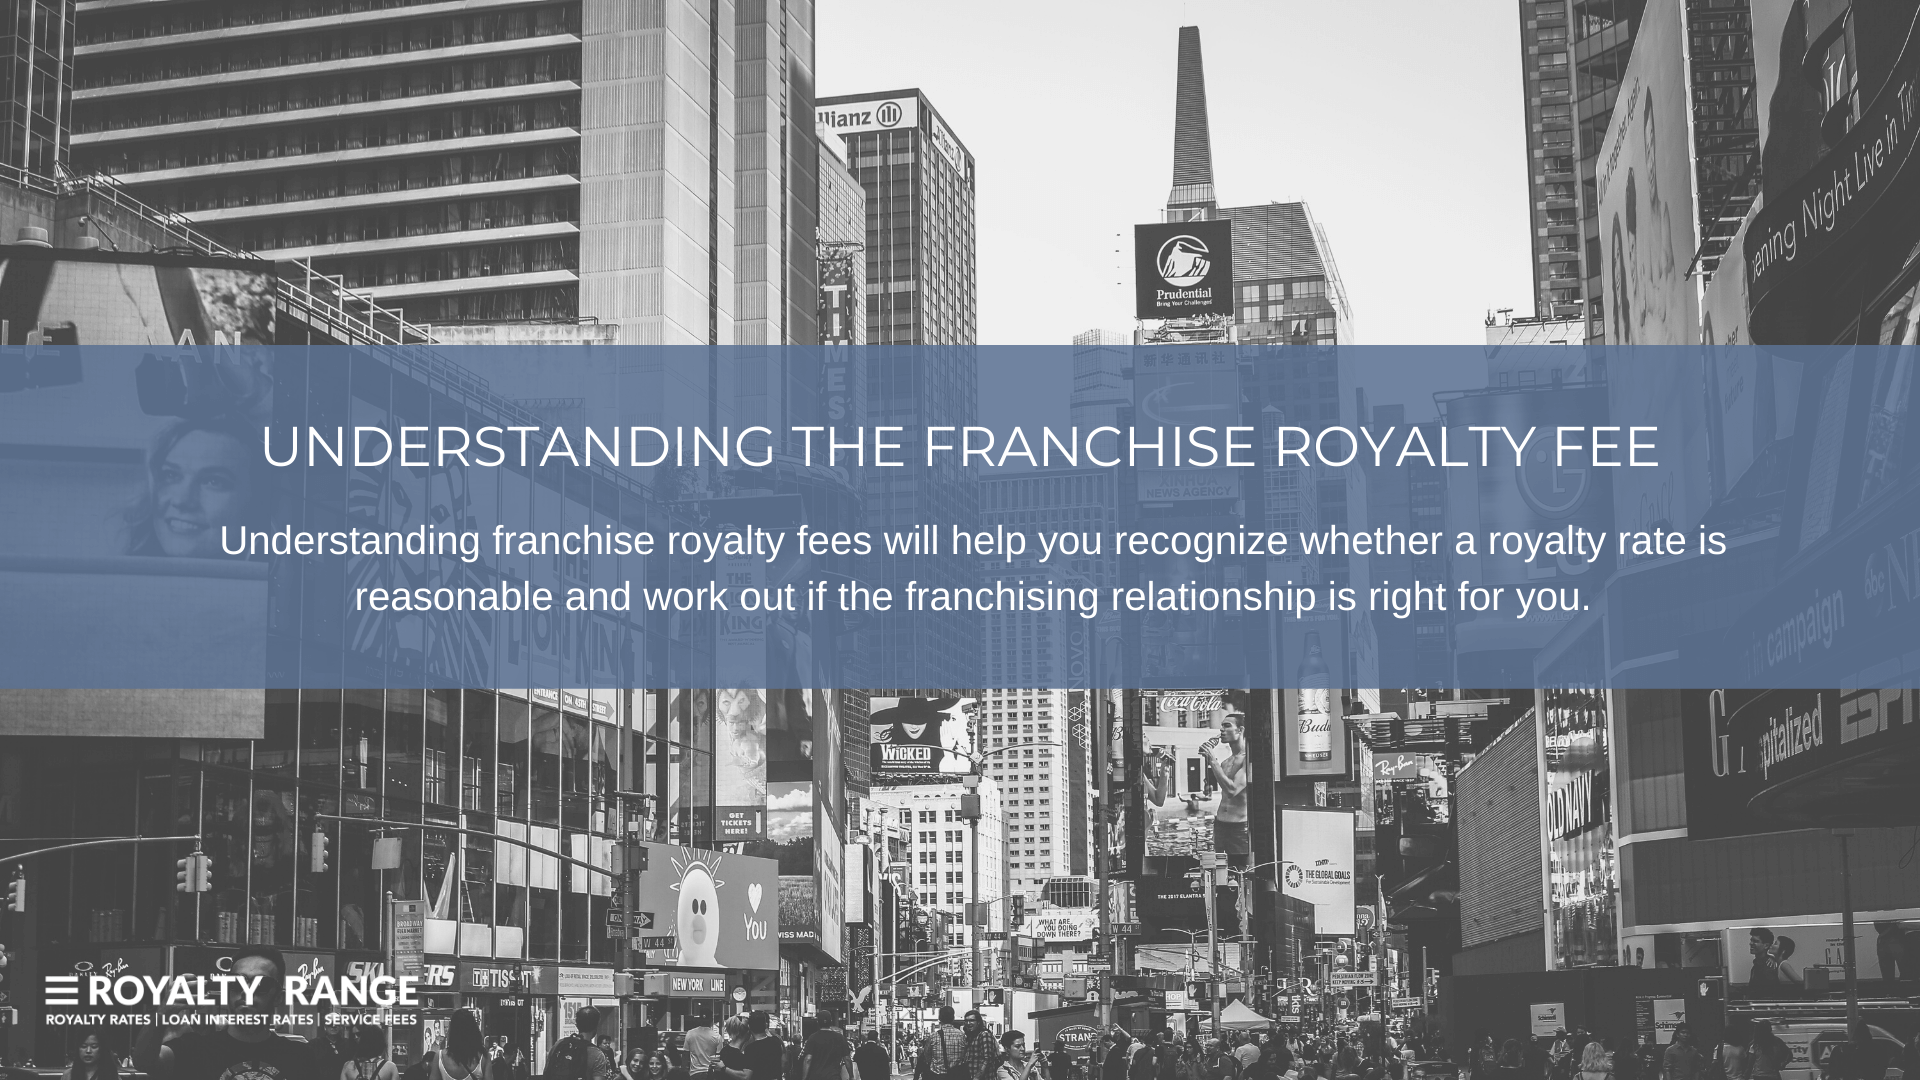 Understanding the franchise royalty fee